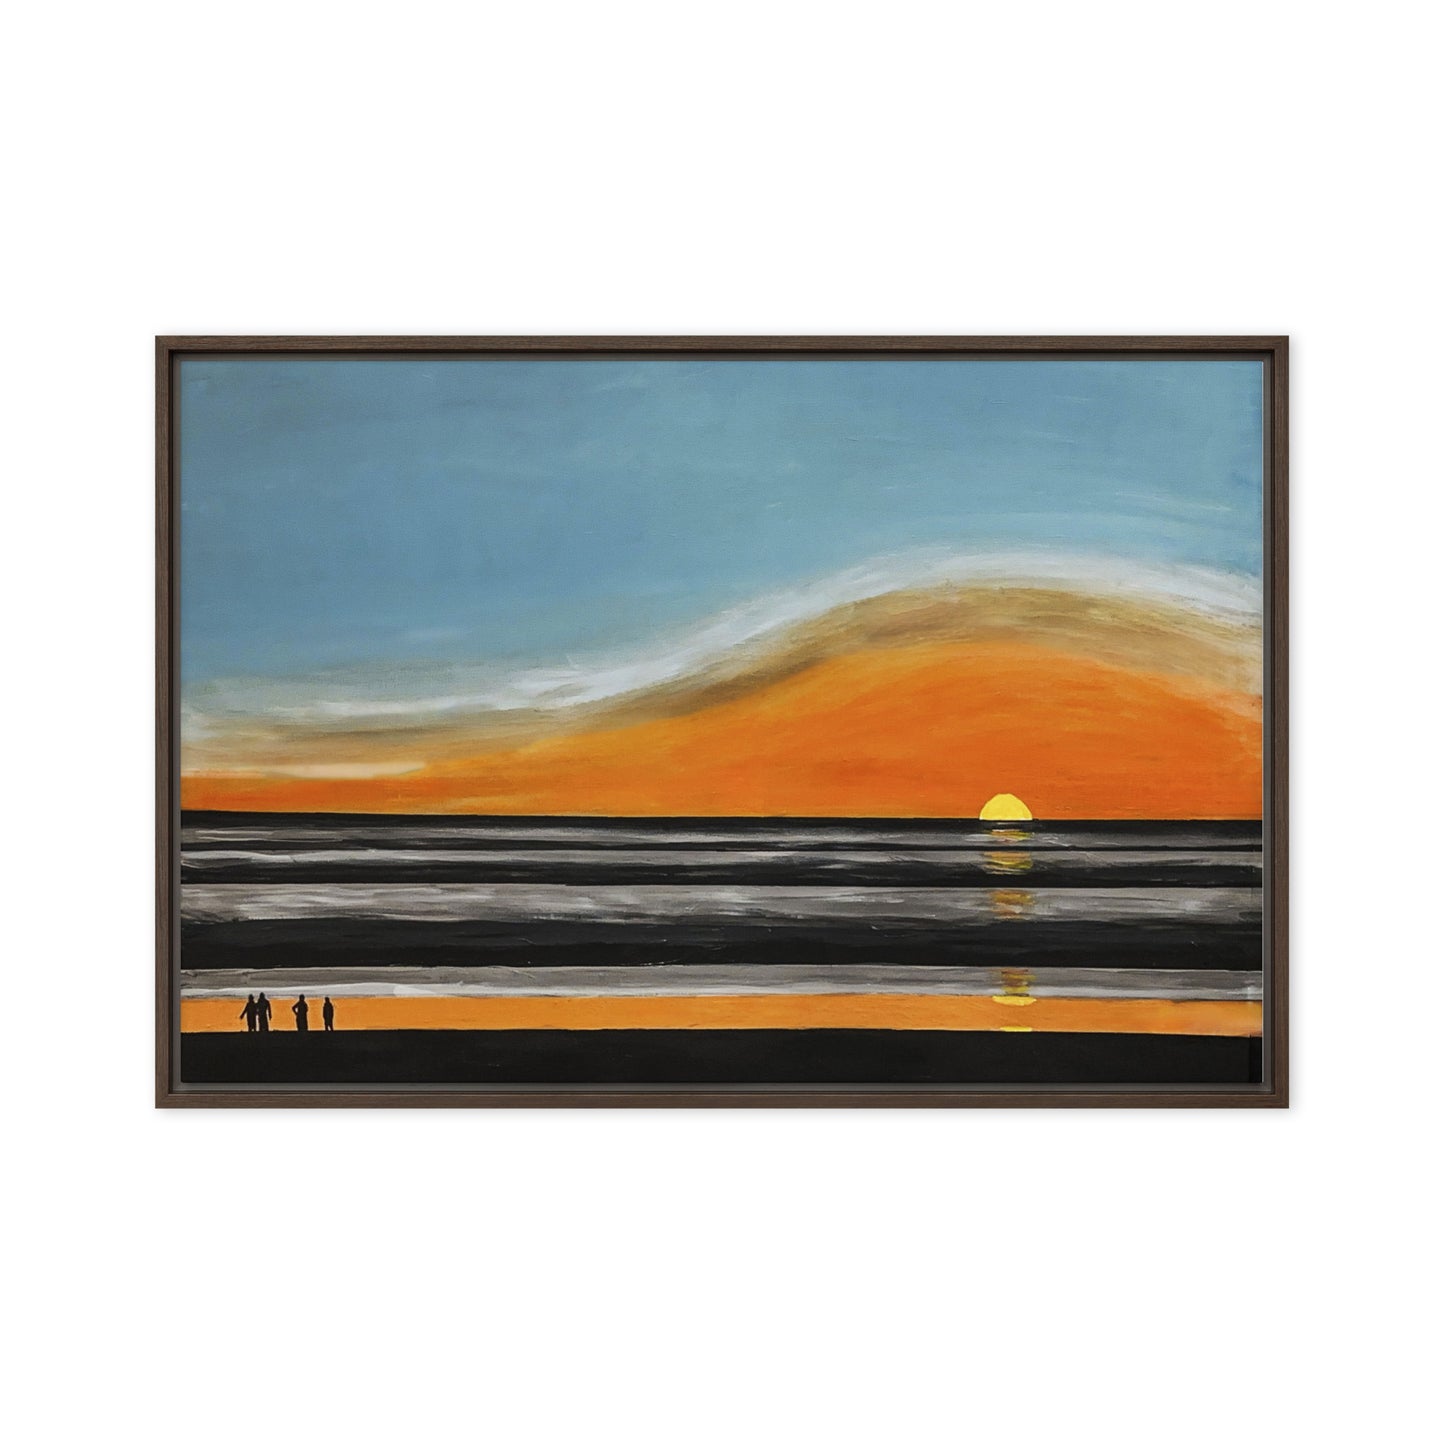 Costa Rican Sunset Viewed from the Beach= Framed canvas